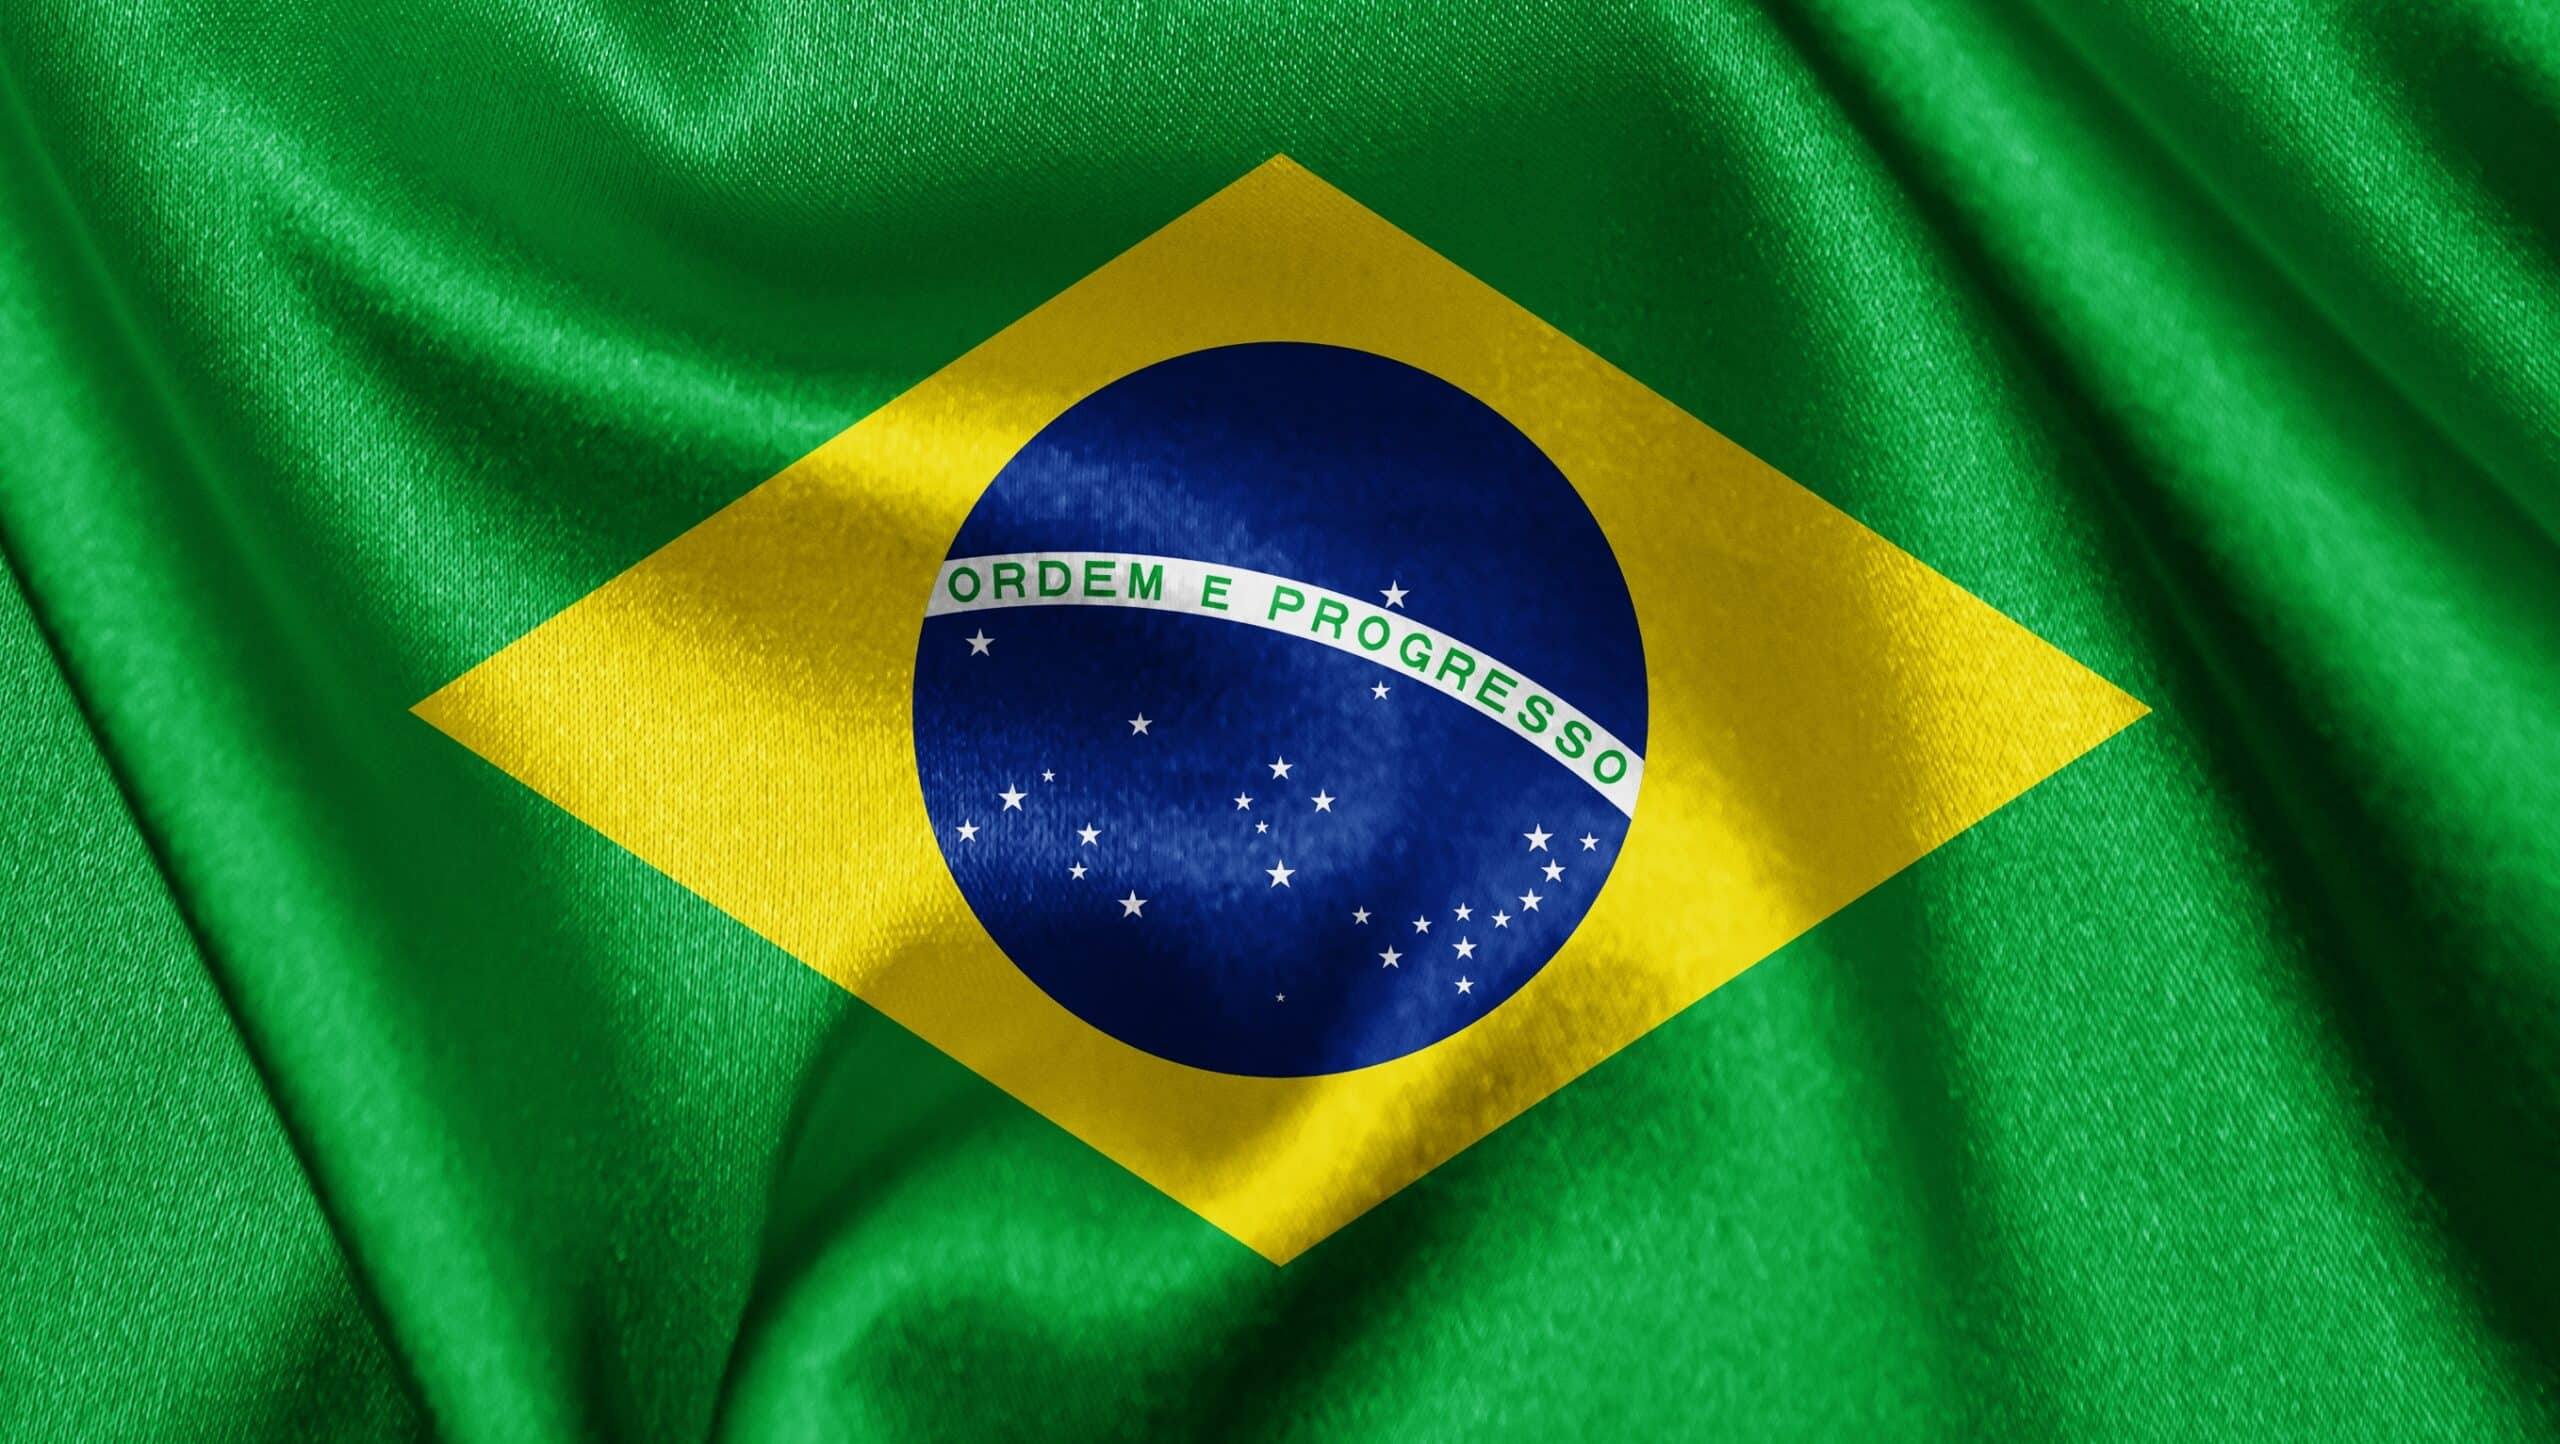 Tether Soars as Brazil’s Preferred Crypto Amid Inflation Woes